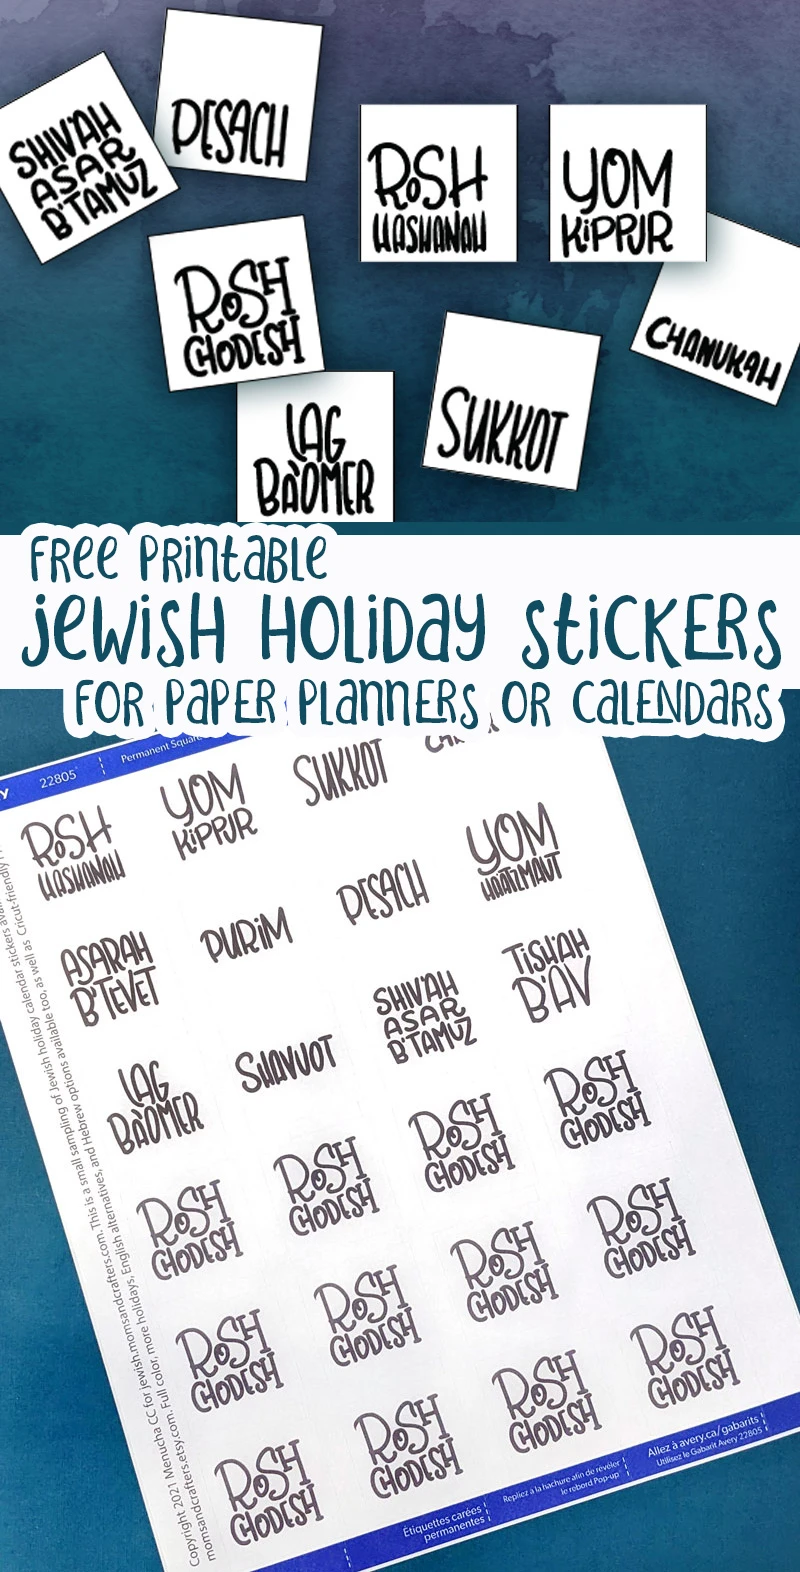 Click for free printable jewish holiday stickers and free planner stickers to mark all the Jewish year.